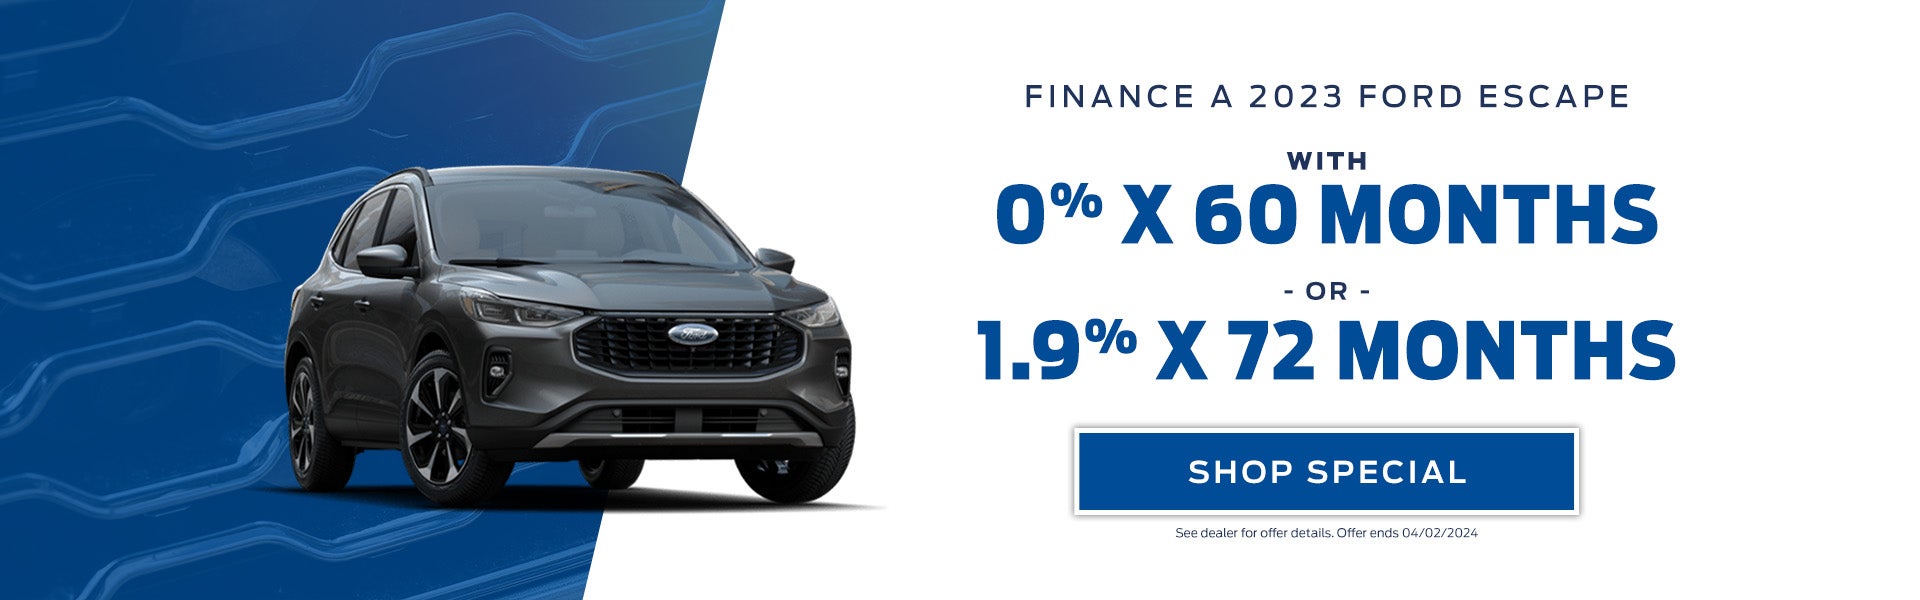 Finance a 2023 Ford Escape with 0% X 60 Months